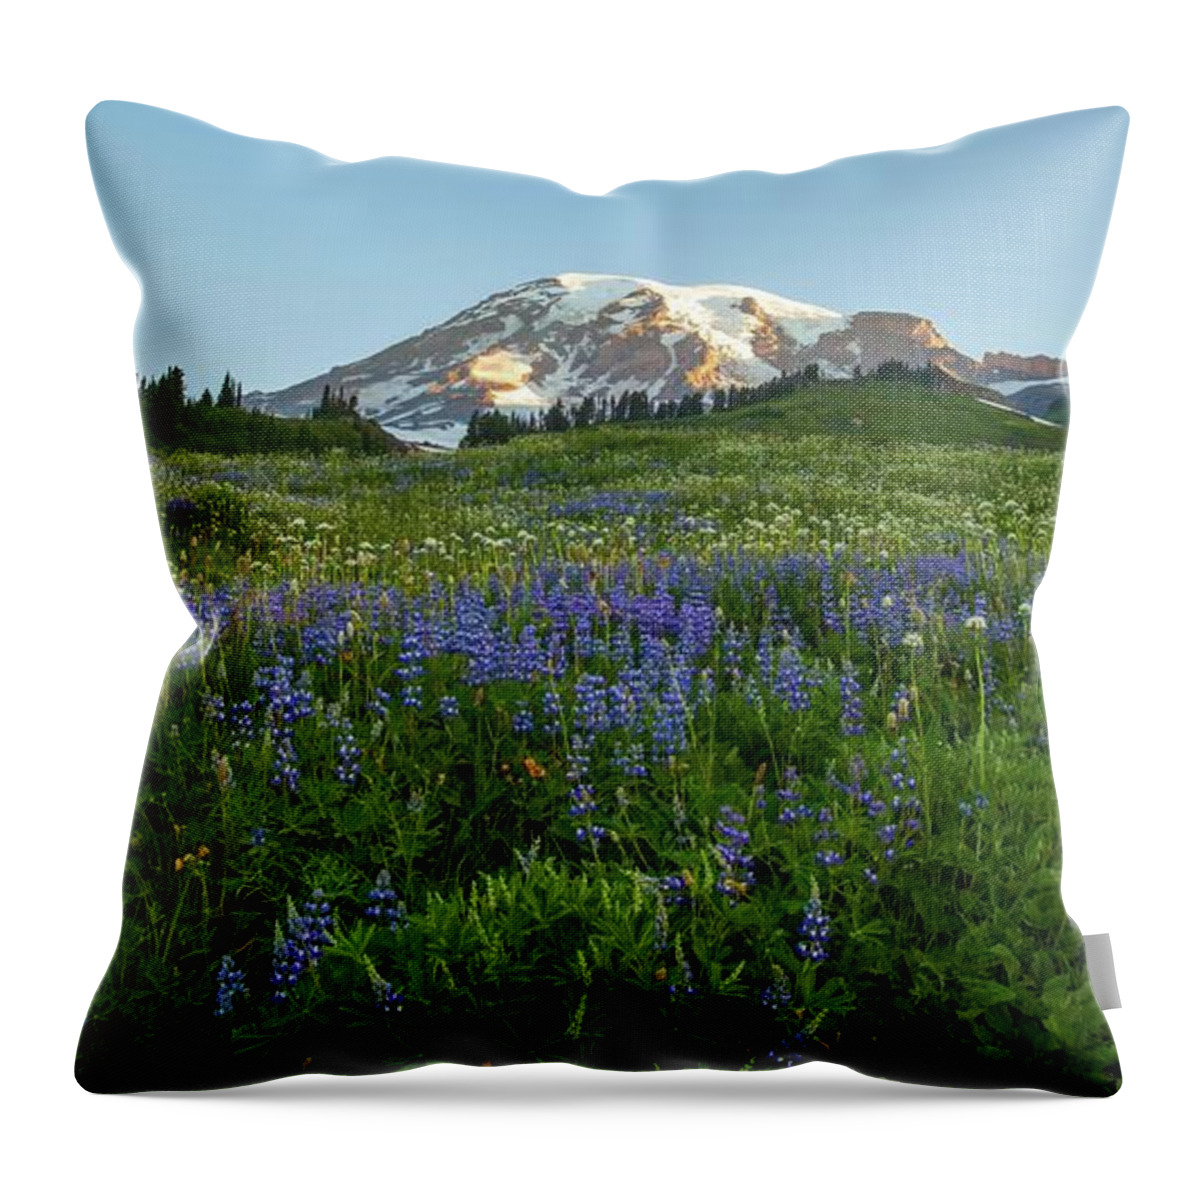 Landscape Throw Pillow featuring the photograph Mount Rainier Brilliant Meadow by Mike Reid